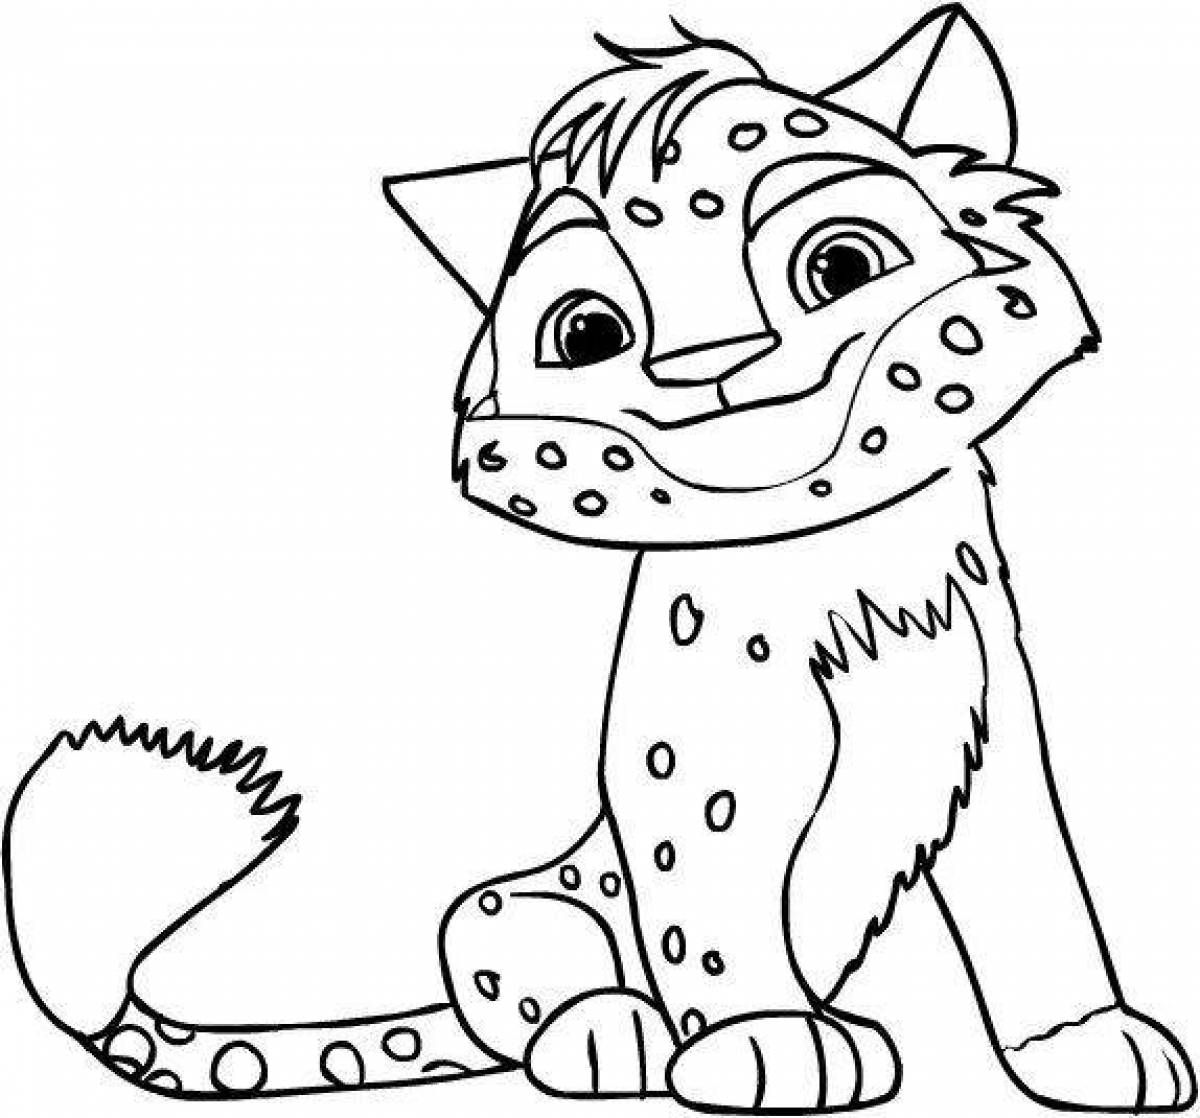 Animated tiger and leo coloring pages for kids